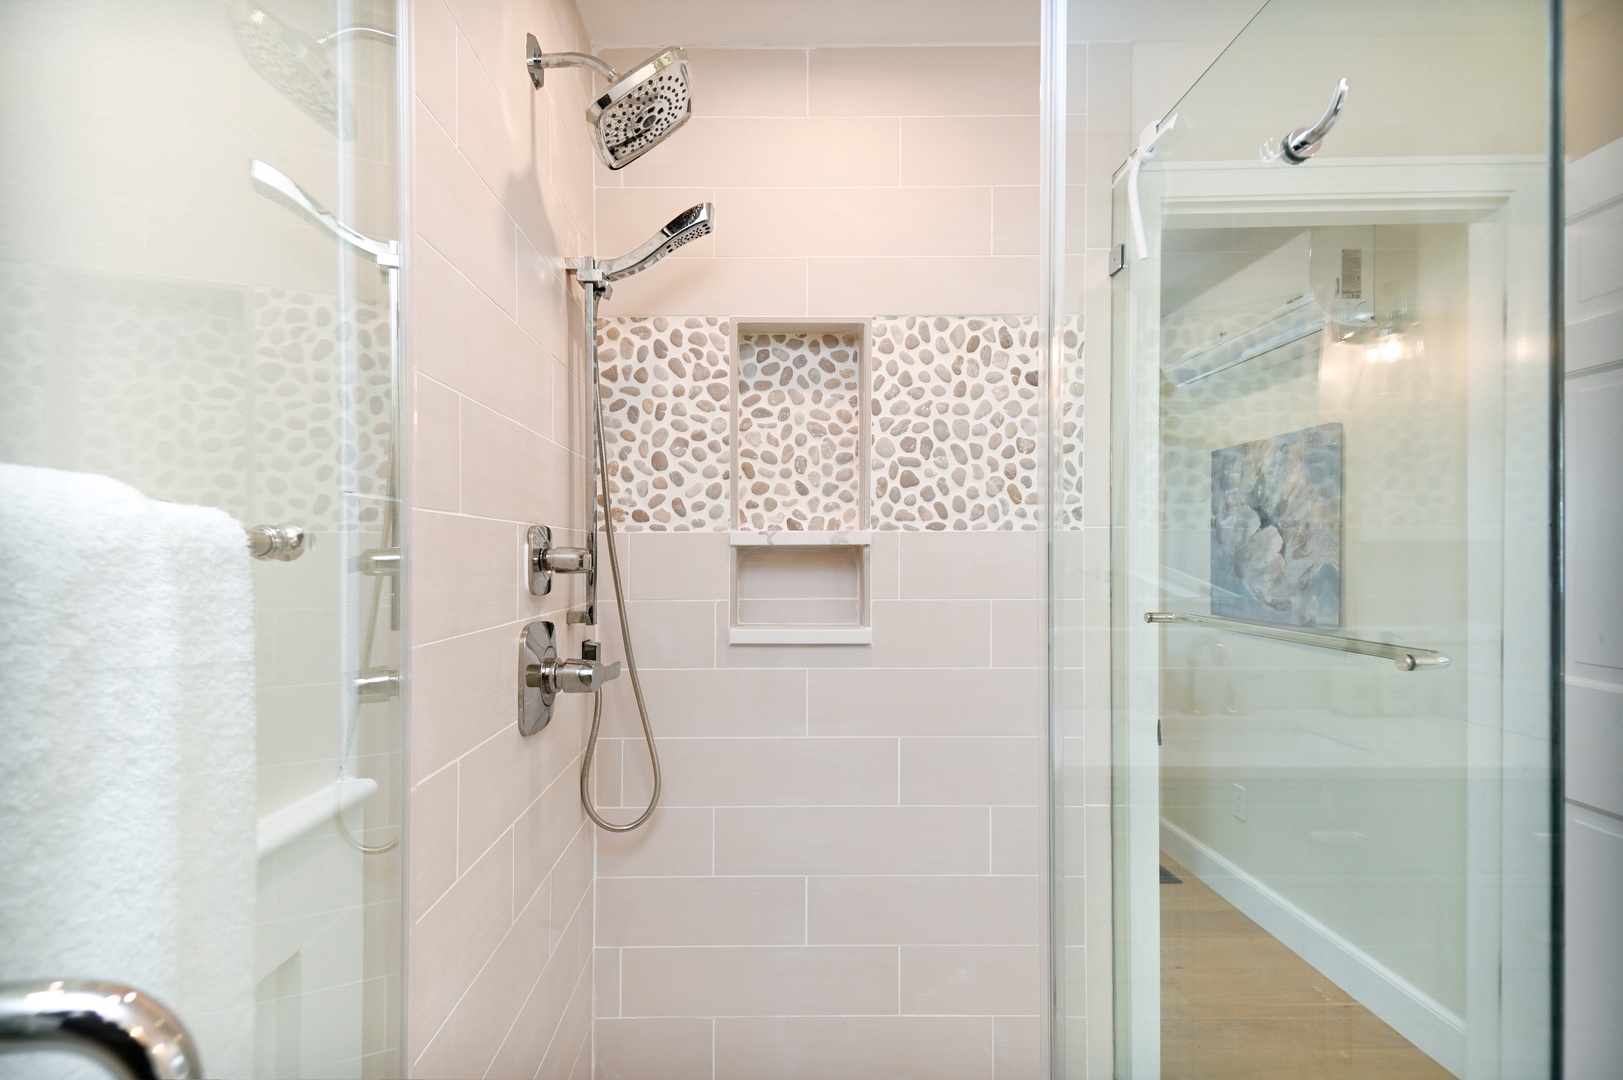 The chic ensuite bath includes a single vanity & luxurious glass shower